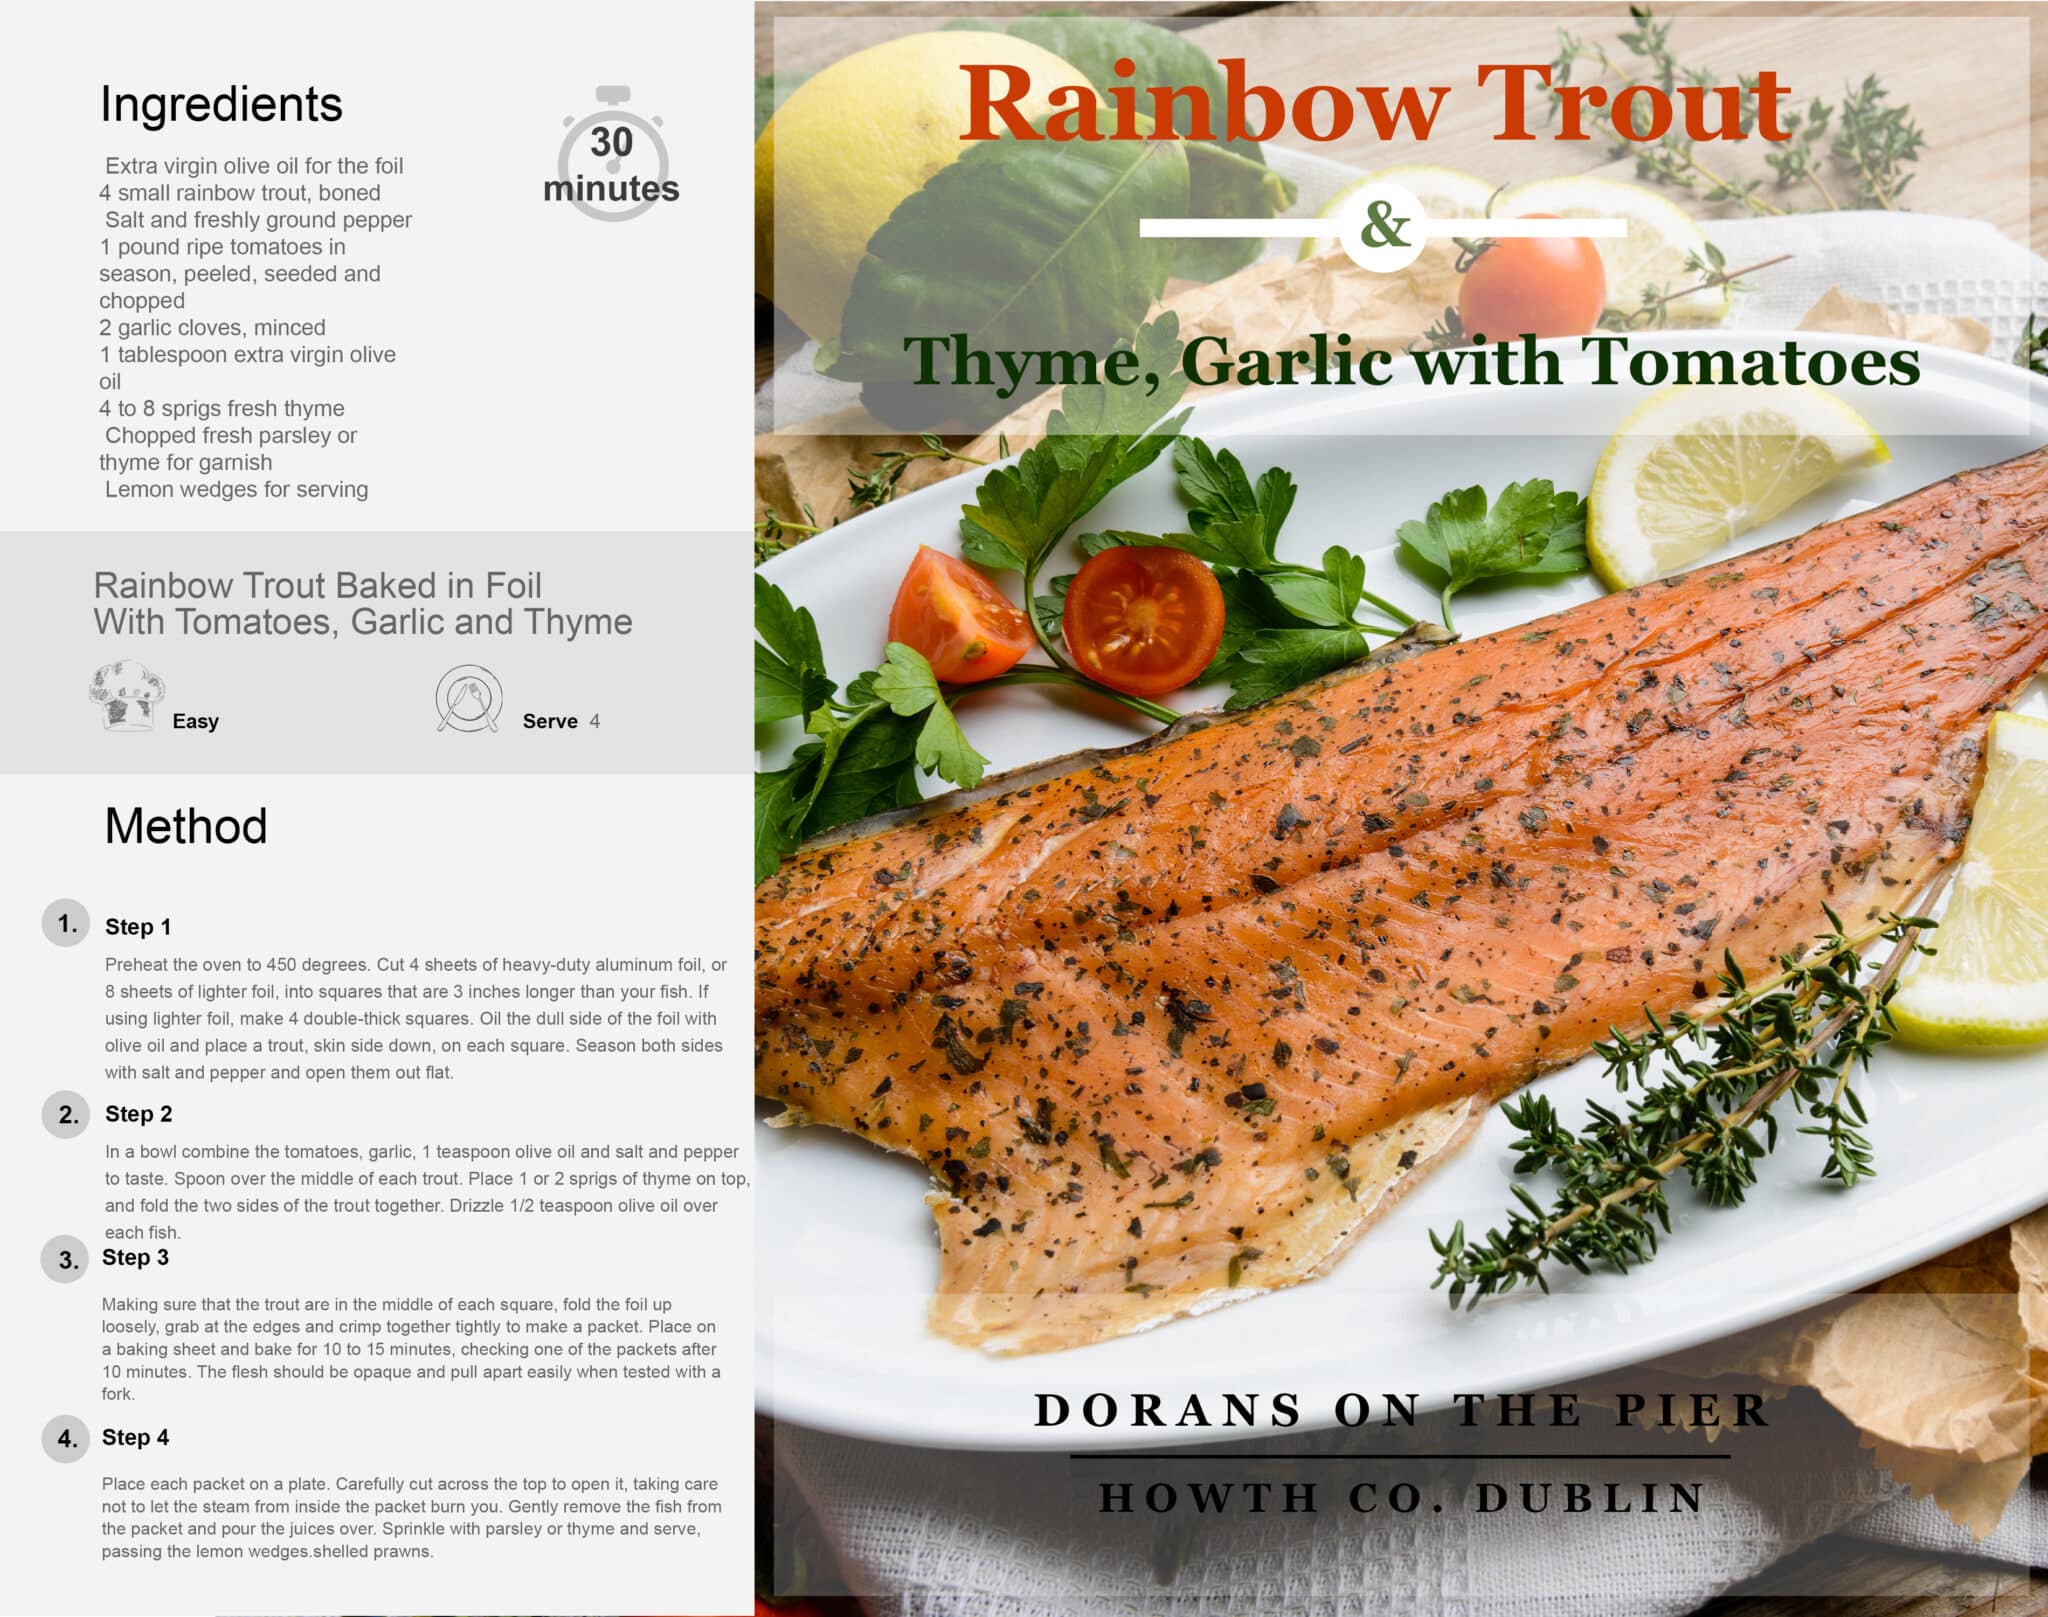 Rainbow Trout & Thyme, Garlic with Tomatoes